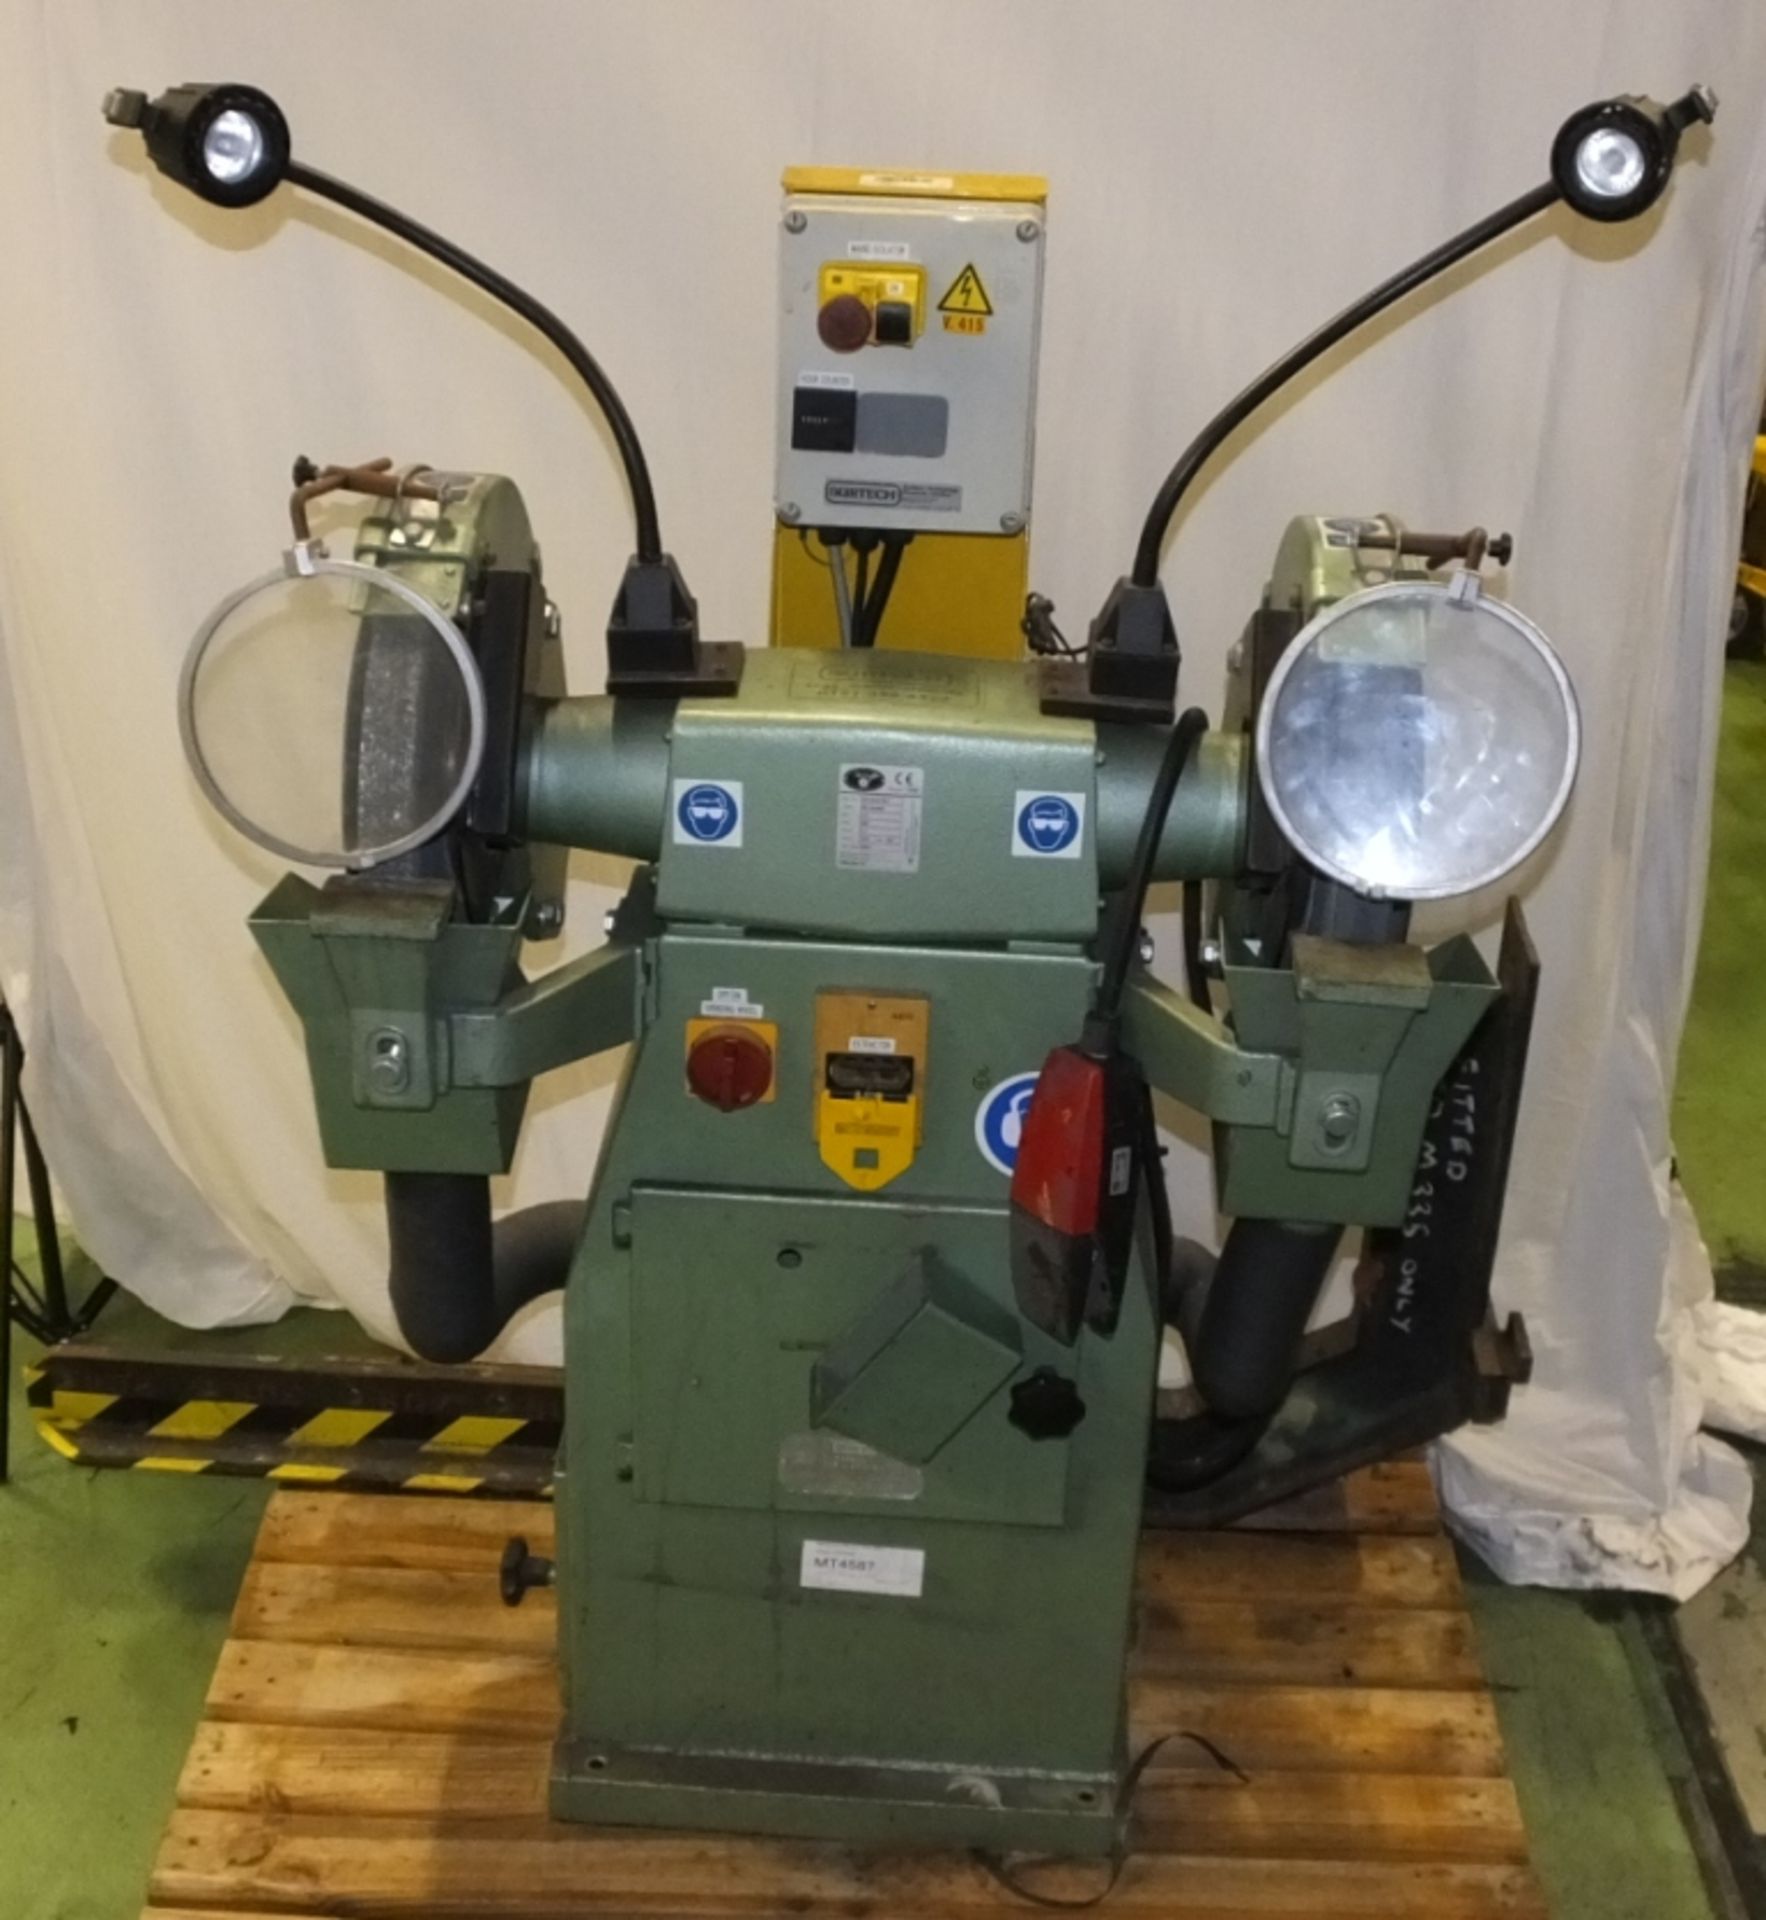 Roma Double Headed Grinder 30/40 - 400V - 5.1A - Serial 0512032.001 - hours run 40 - £5 Lo - Image 2 of 8